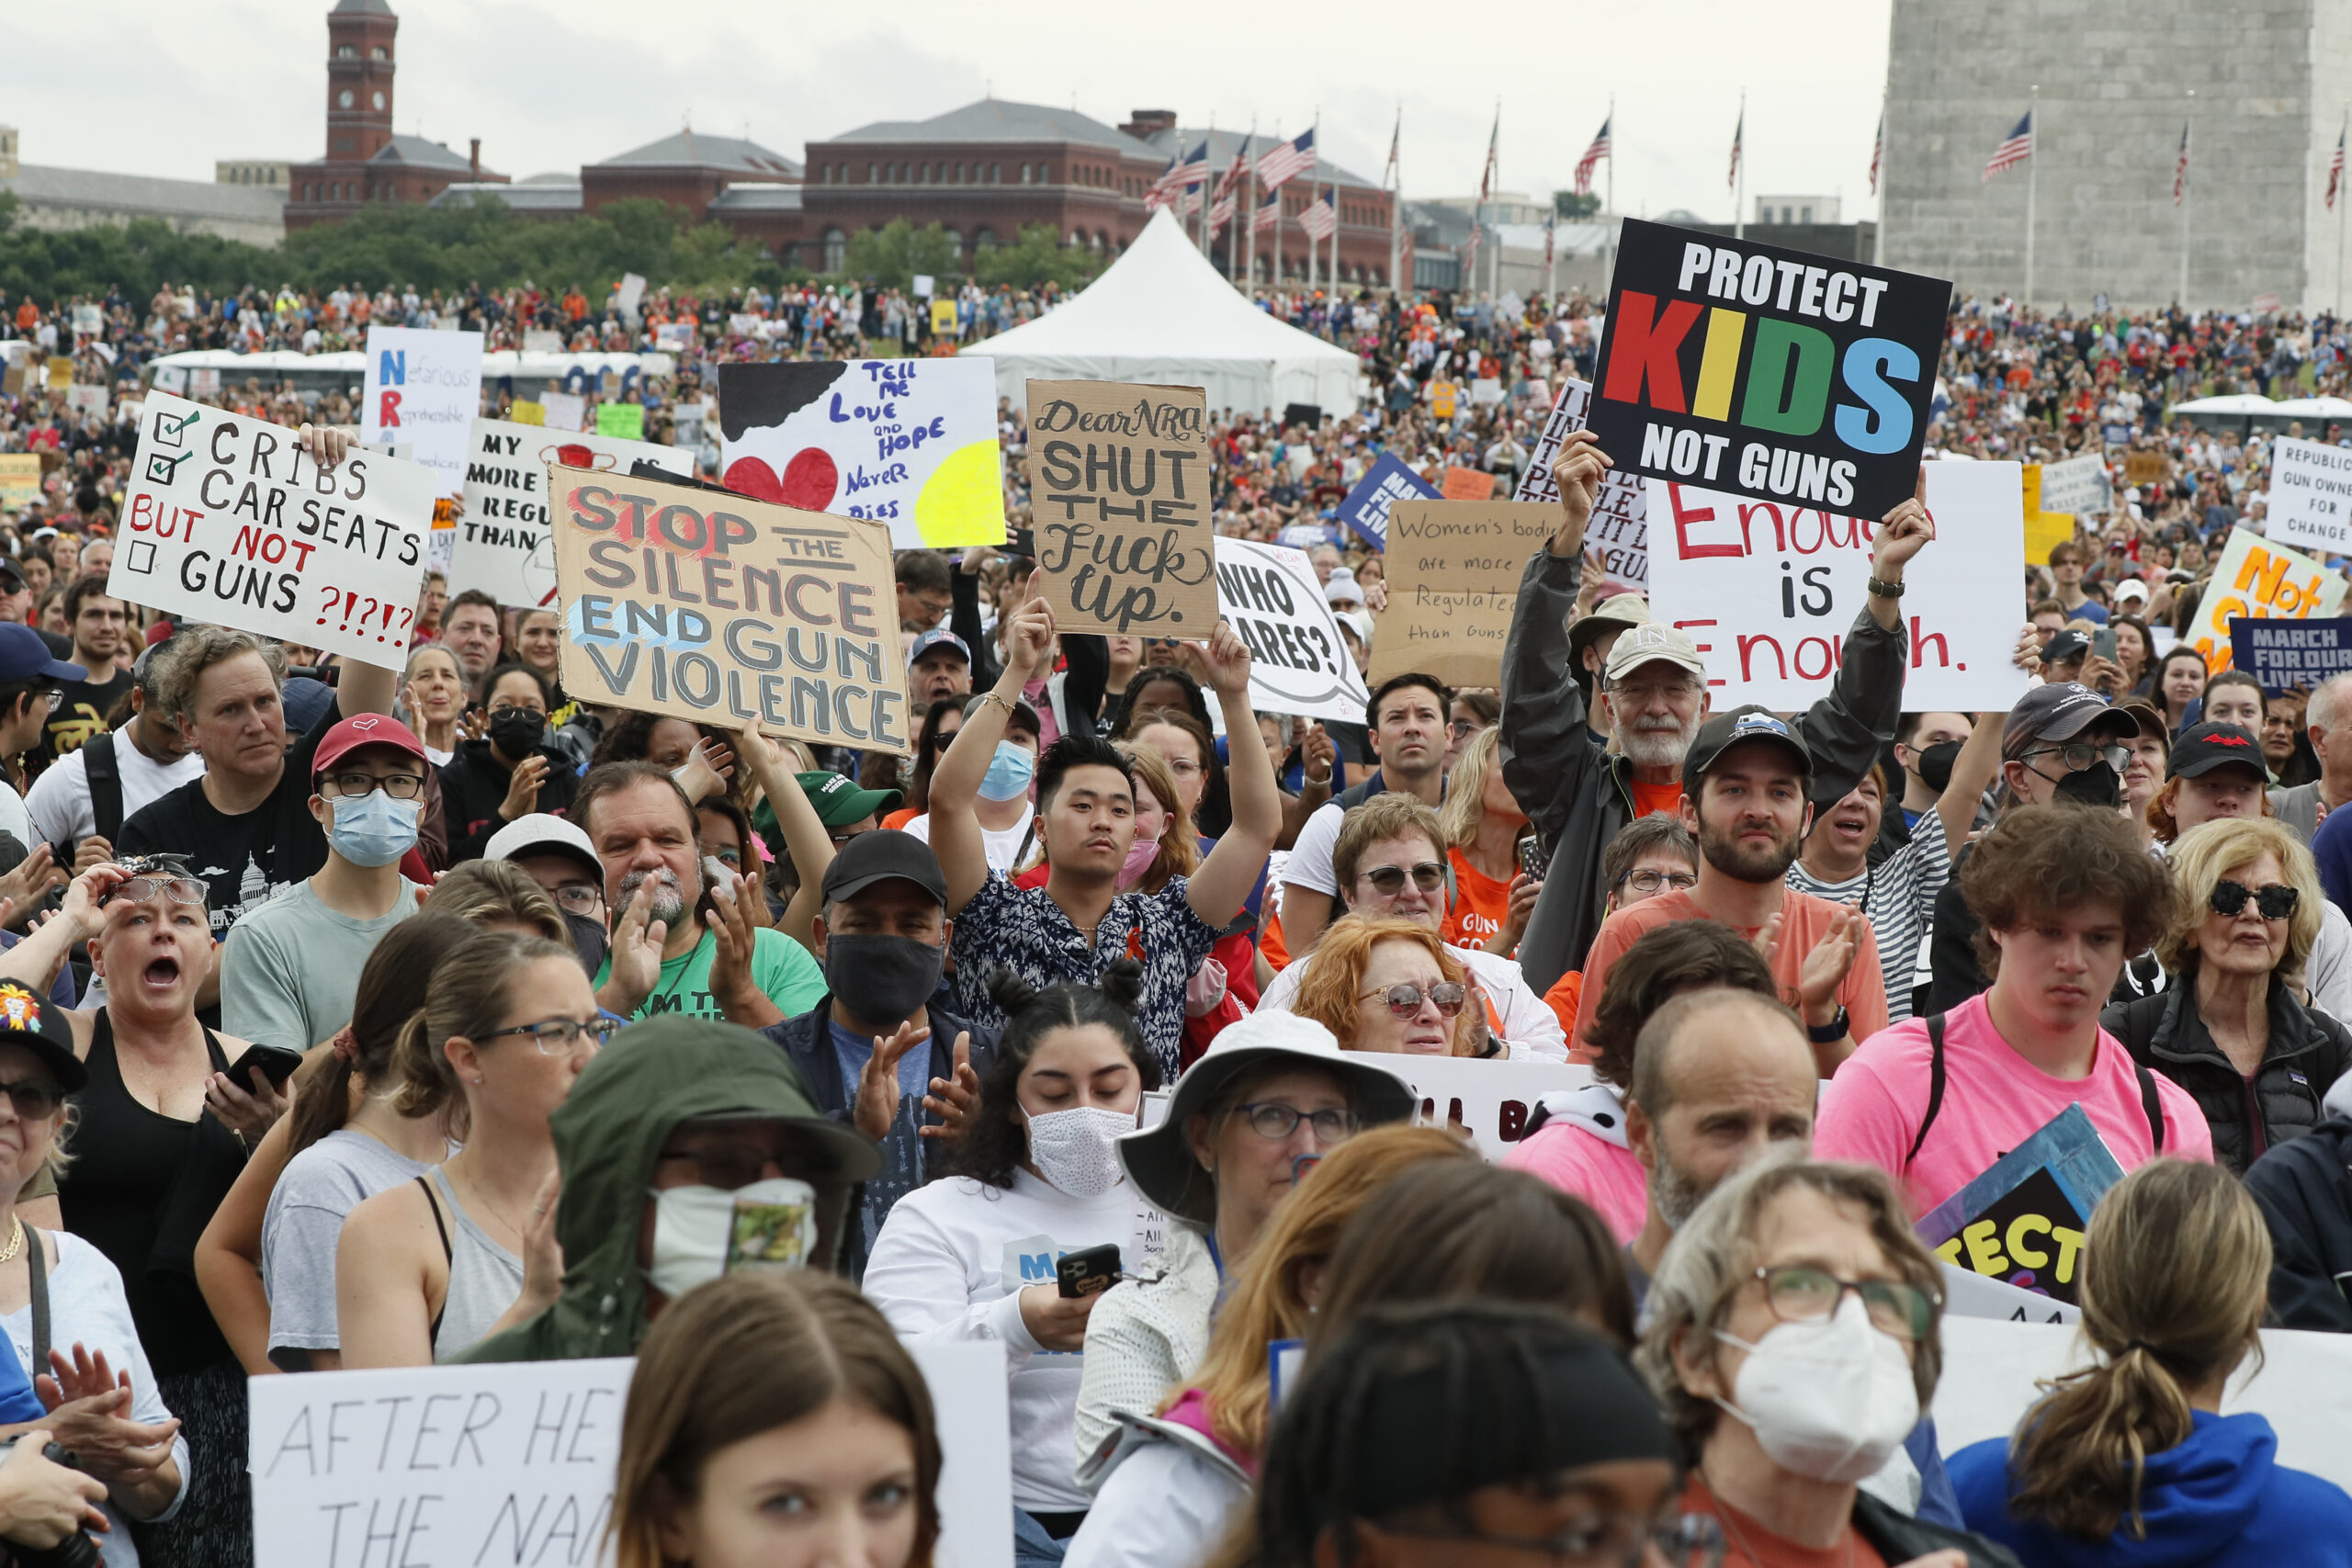 WASHINGTON, DC - JUNE 11: Participants during March for Our Lives 2022 on June 11, 2022 in Washington, DC.